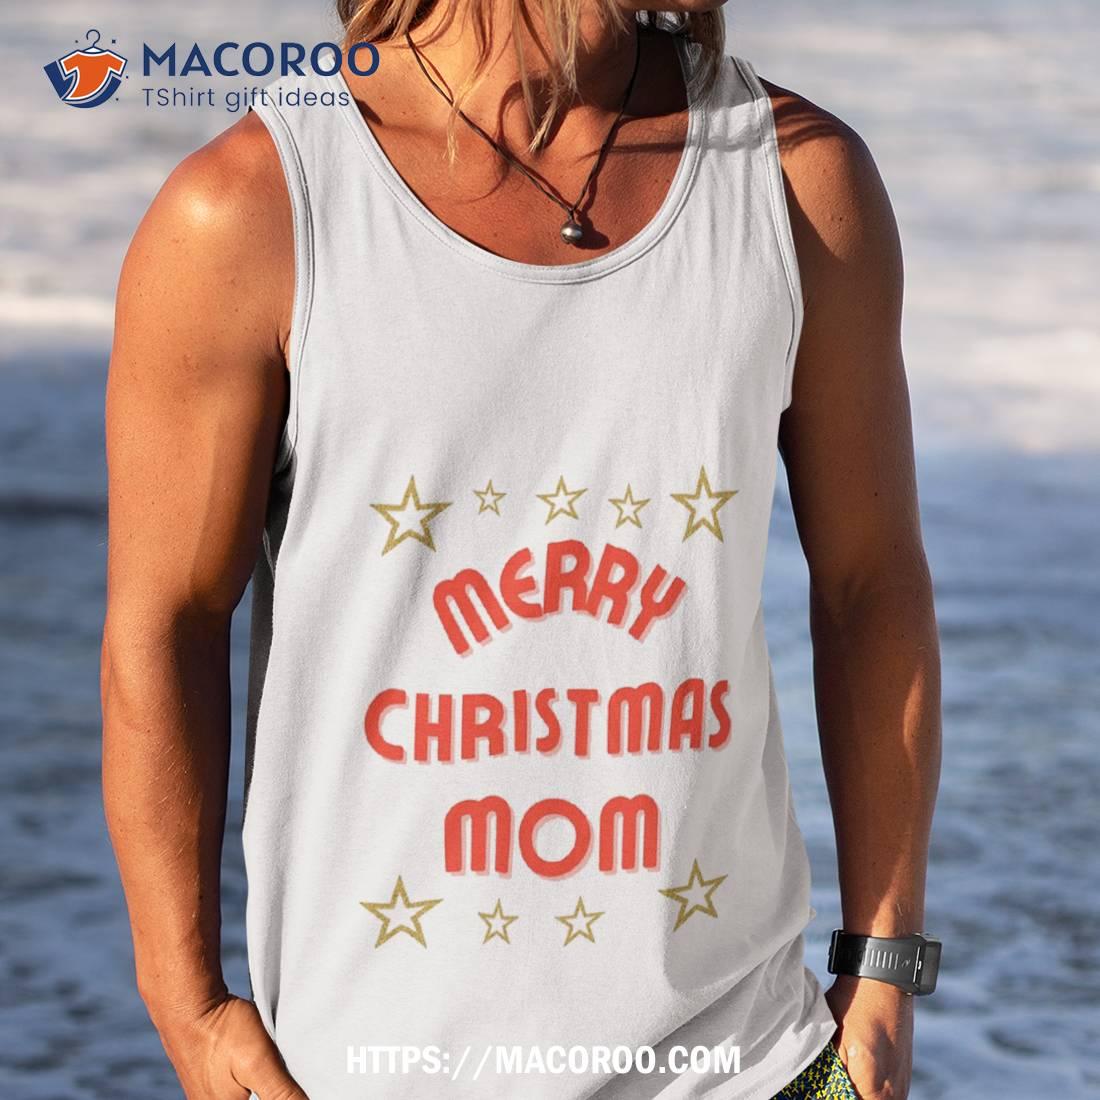 Thoughtful Christmas Gifts for Mom